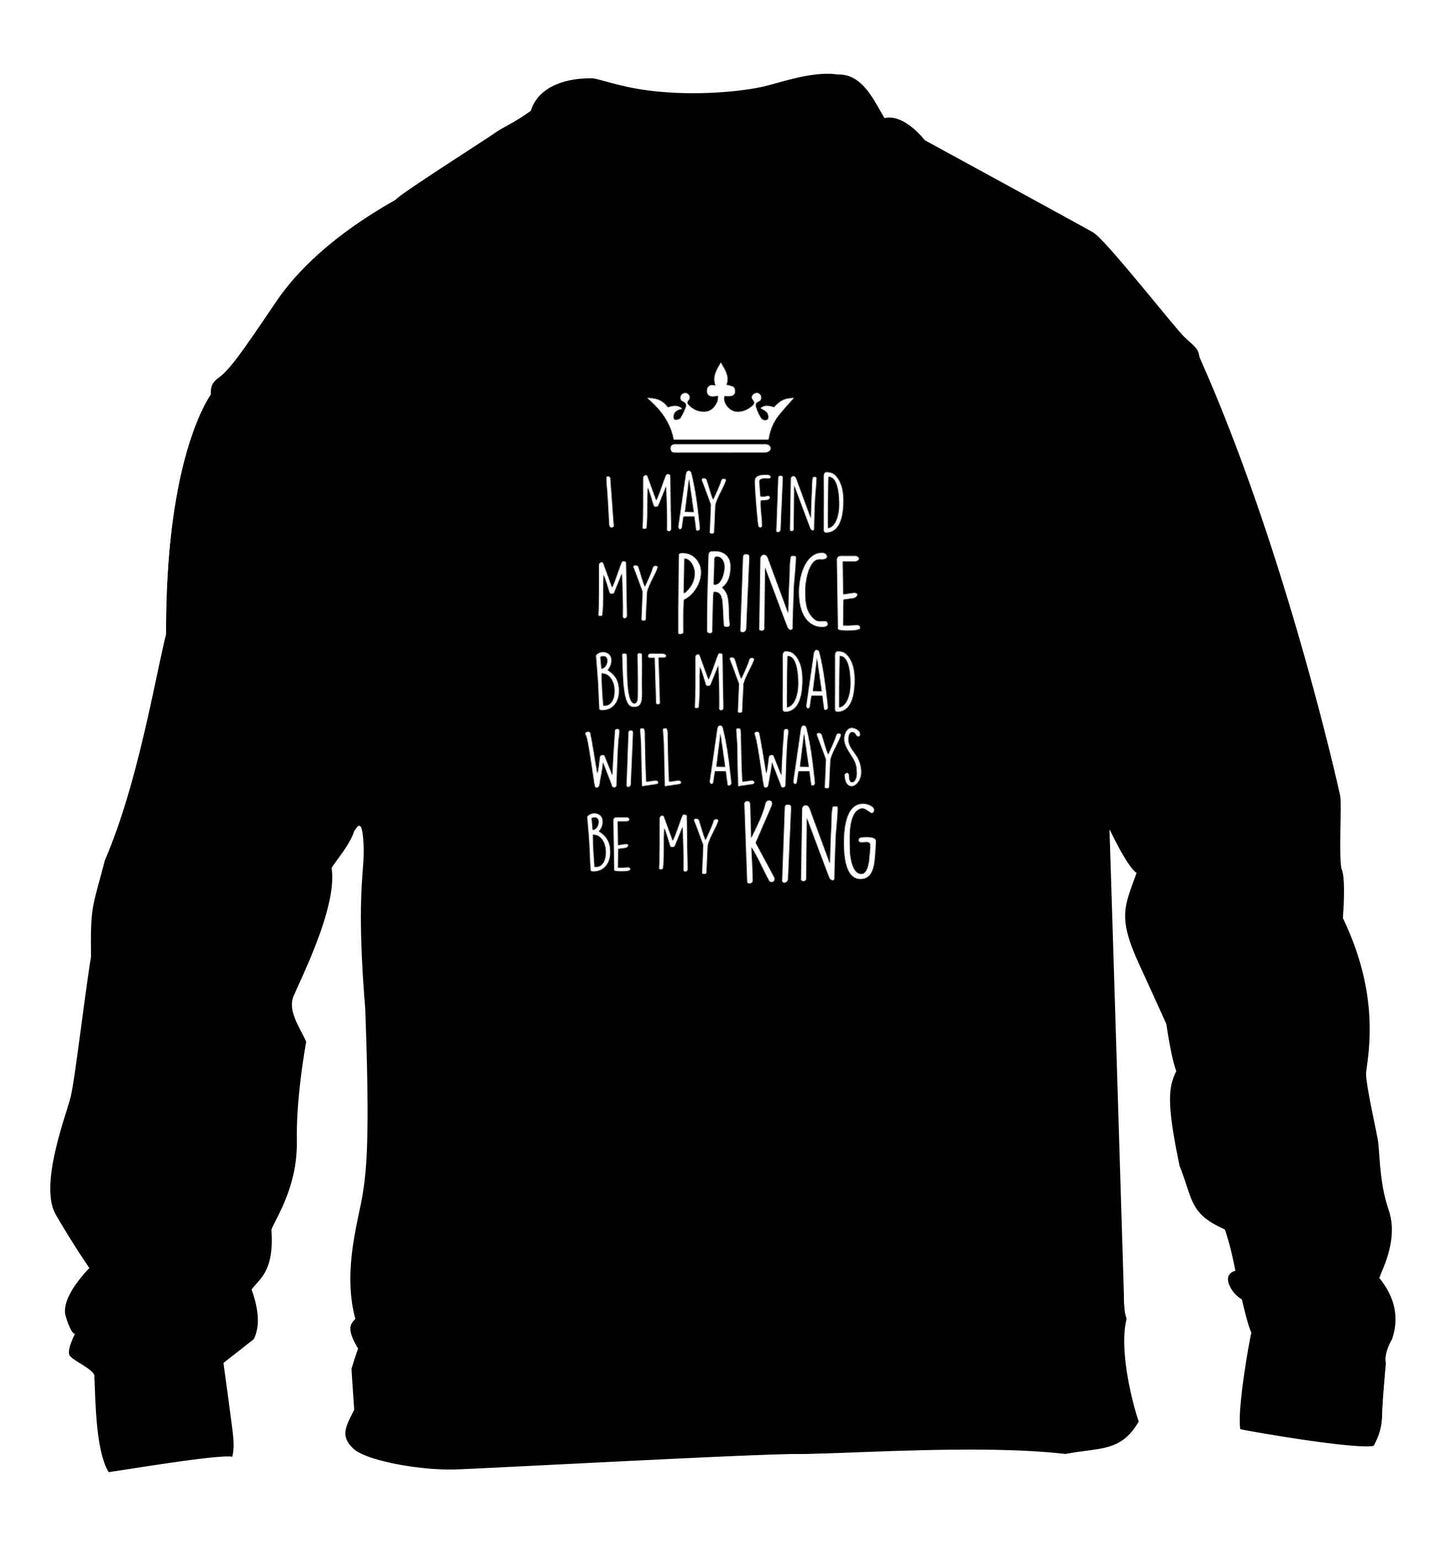 I may find my prince but my dad will always be my king children's black sweater 12-13 Years